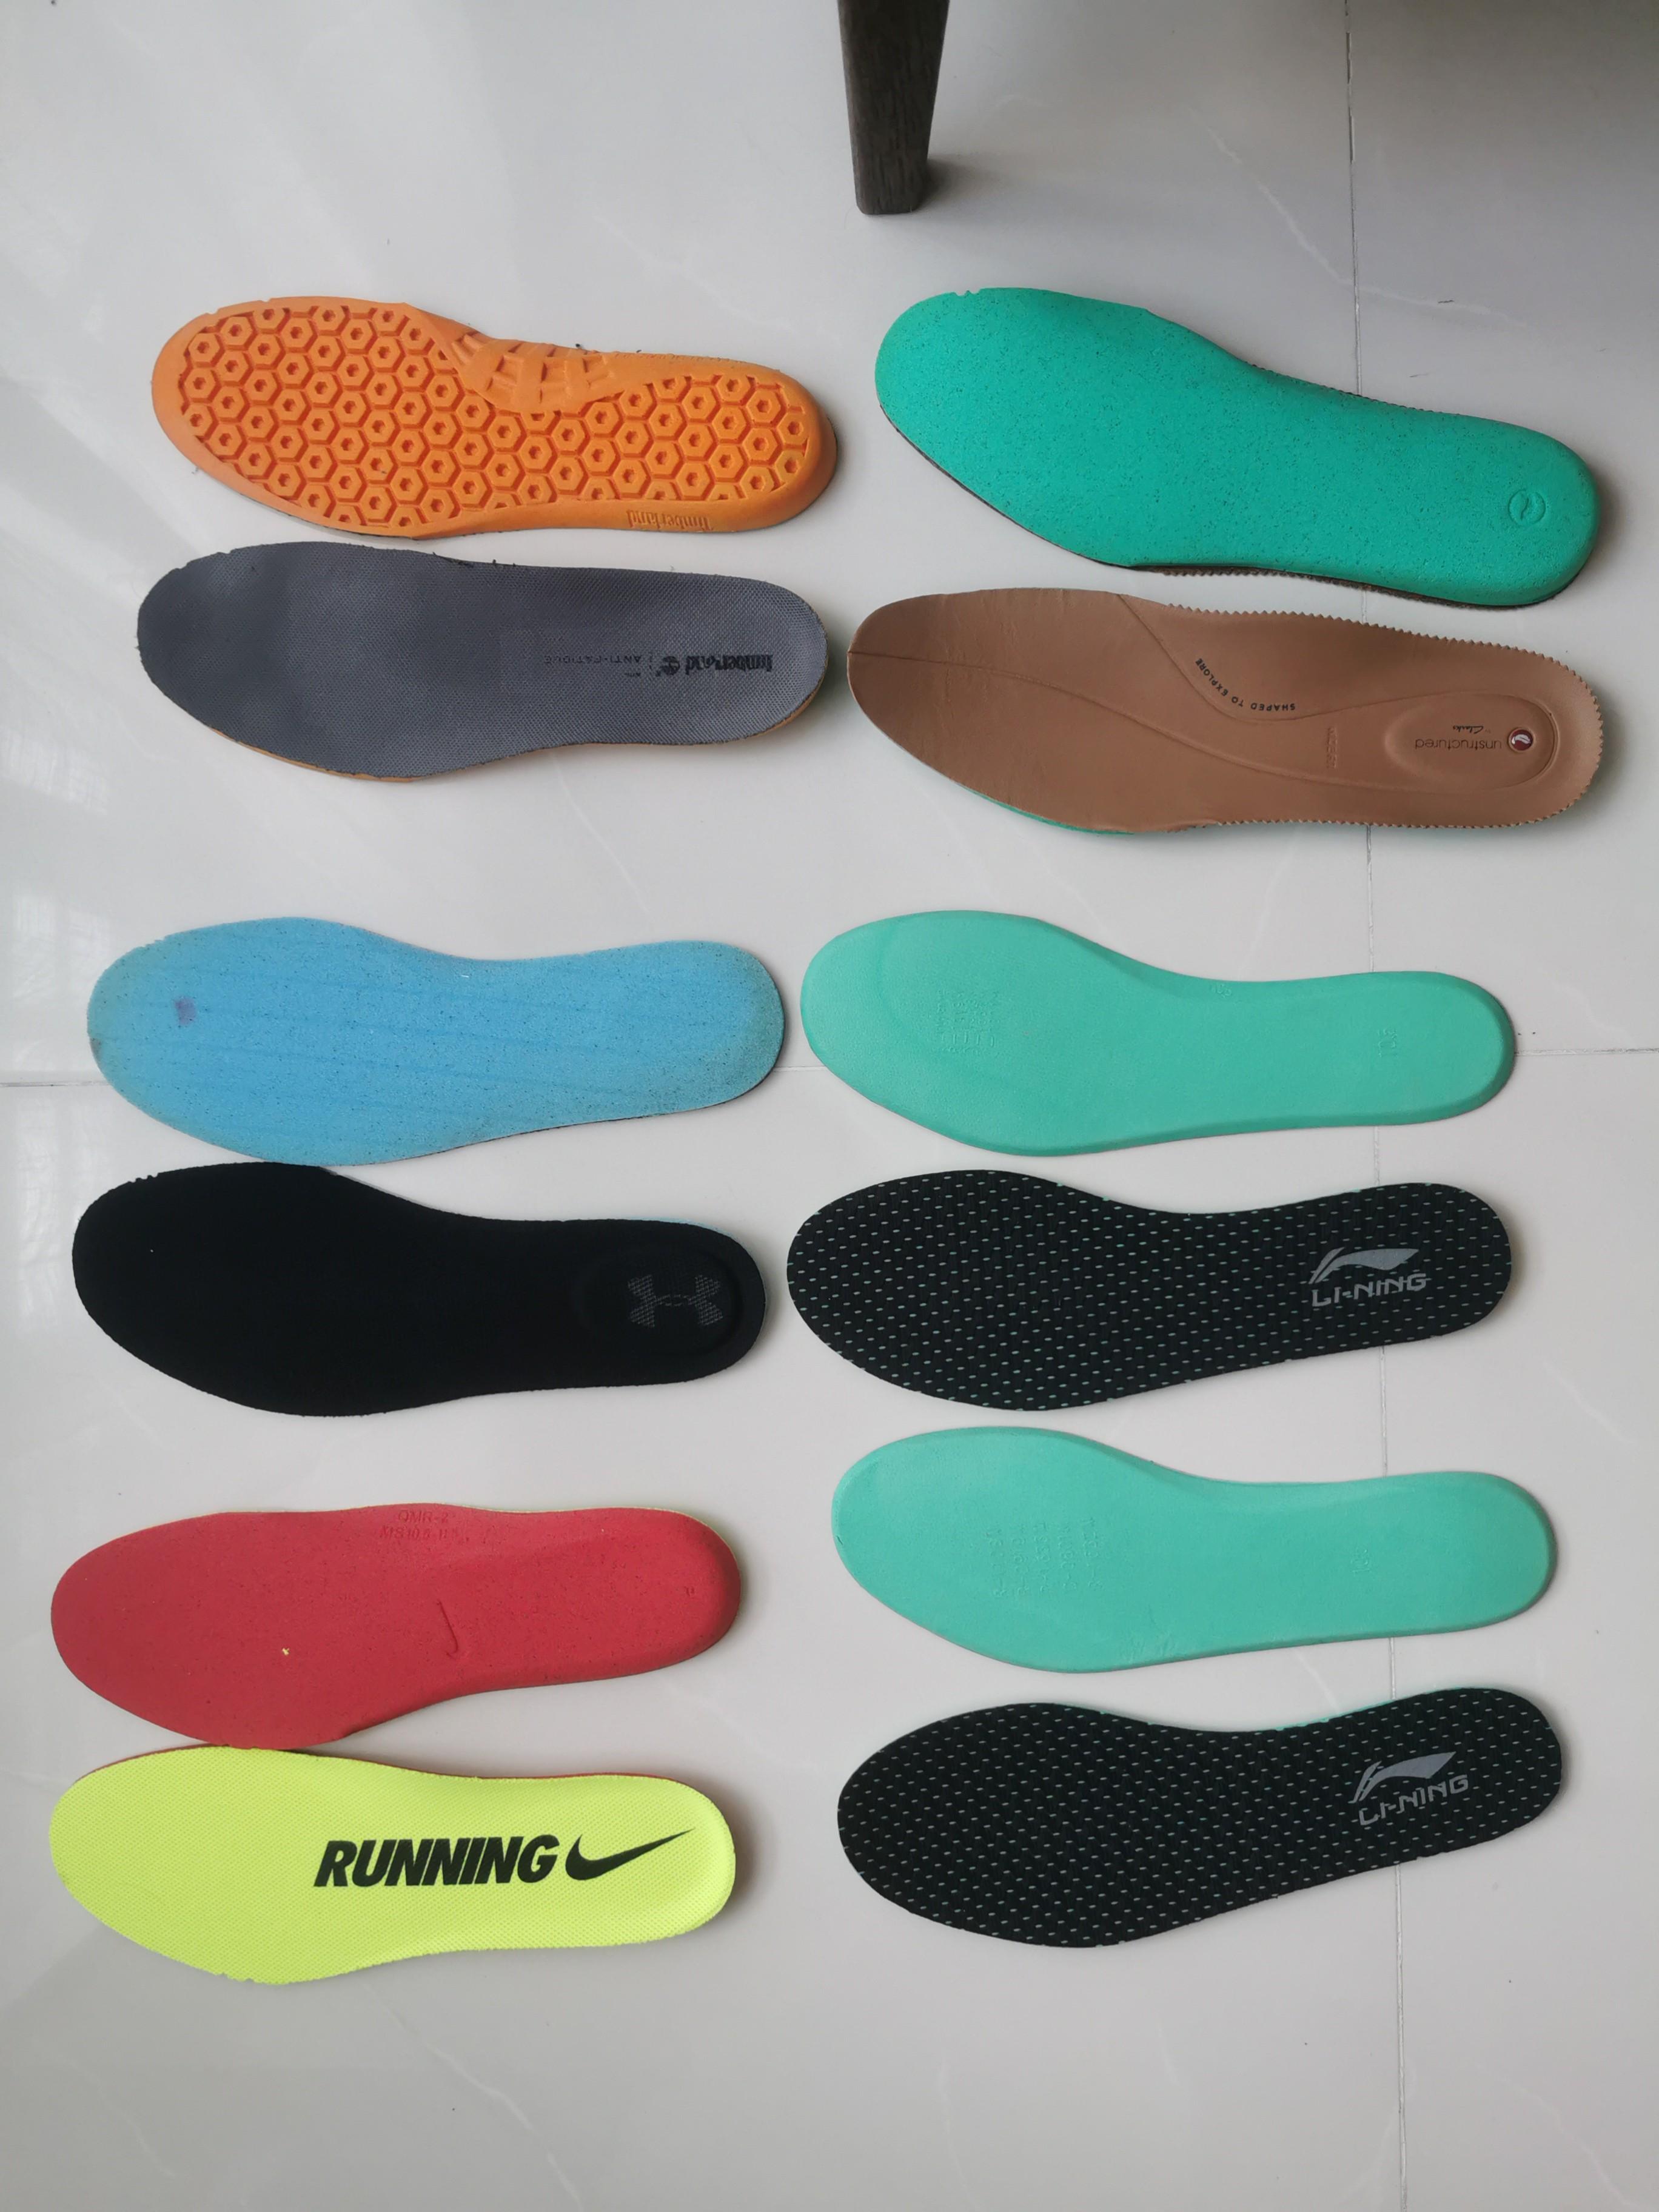 timberland insoles